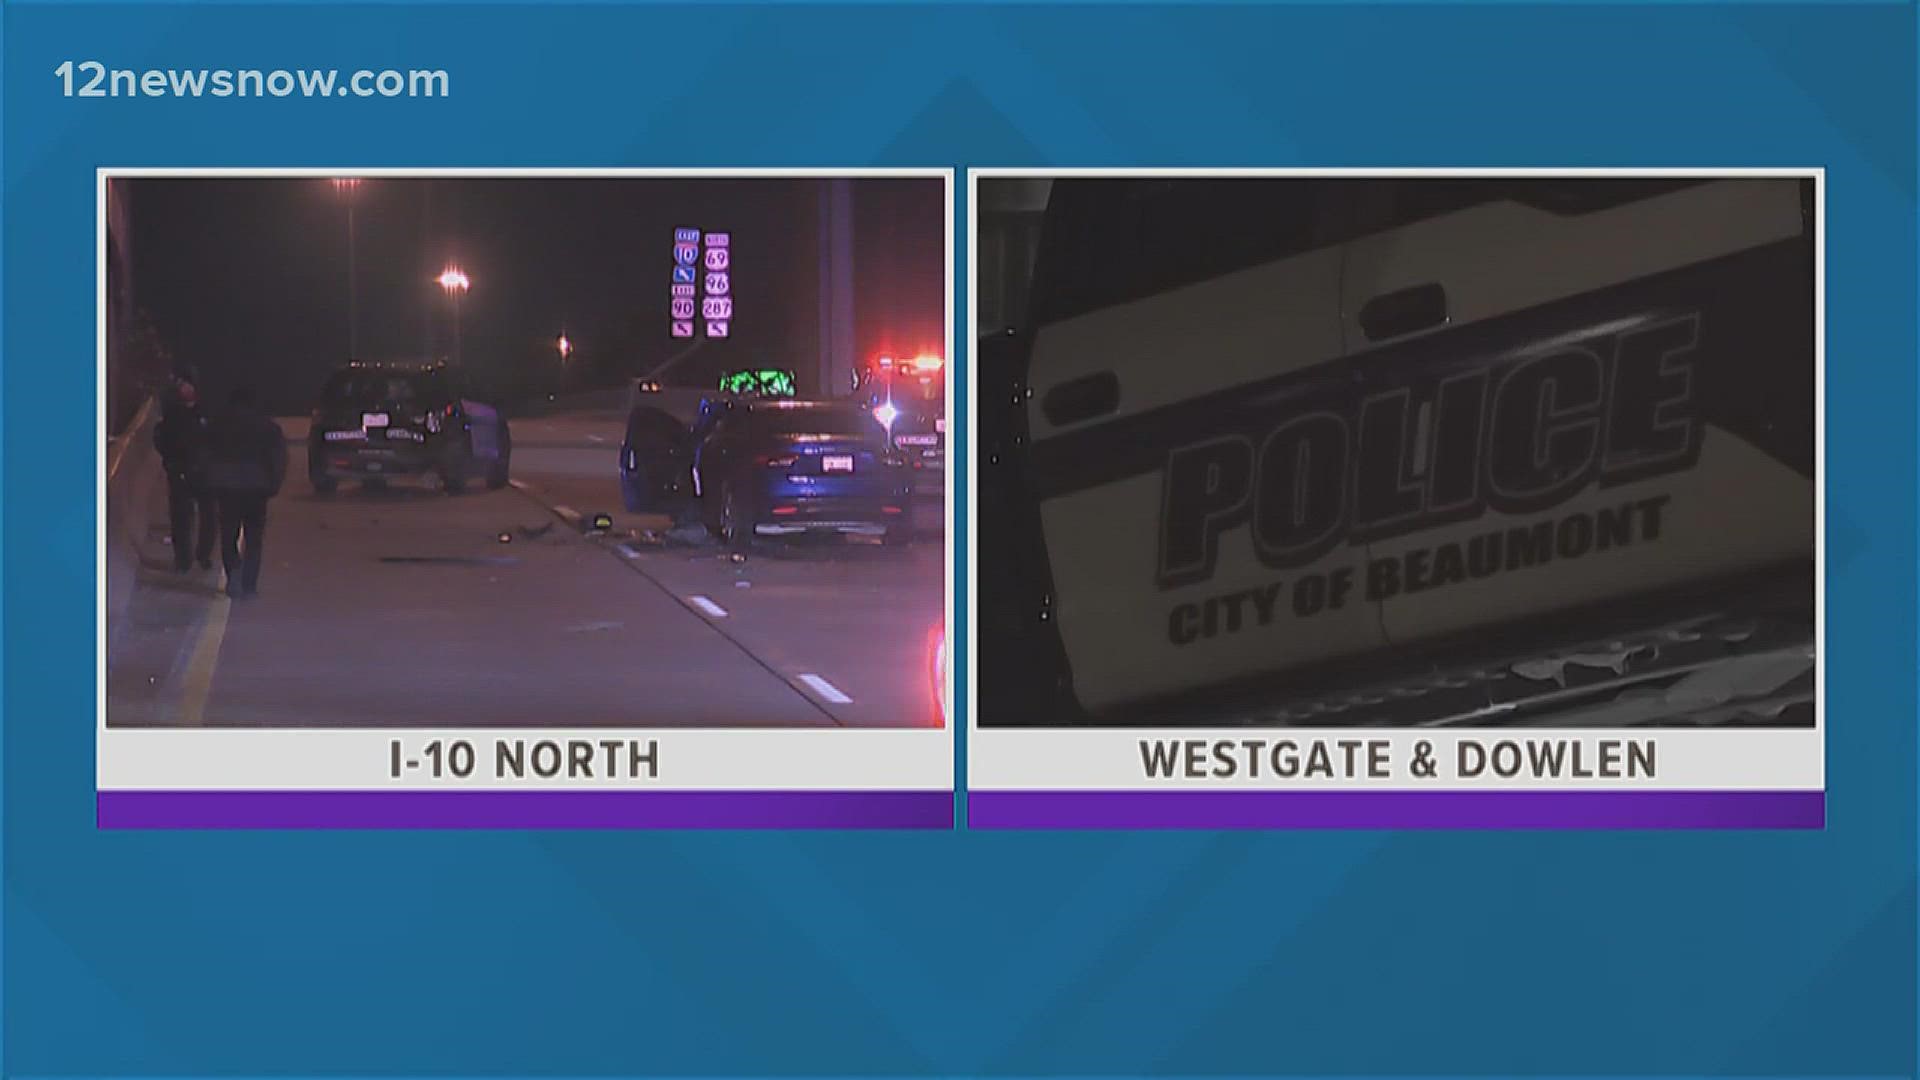 One of the crashes happened in the northbound I-10 lanes and the other crash happened on Westgate and at Dowlen.